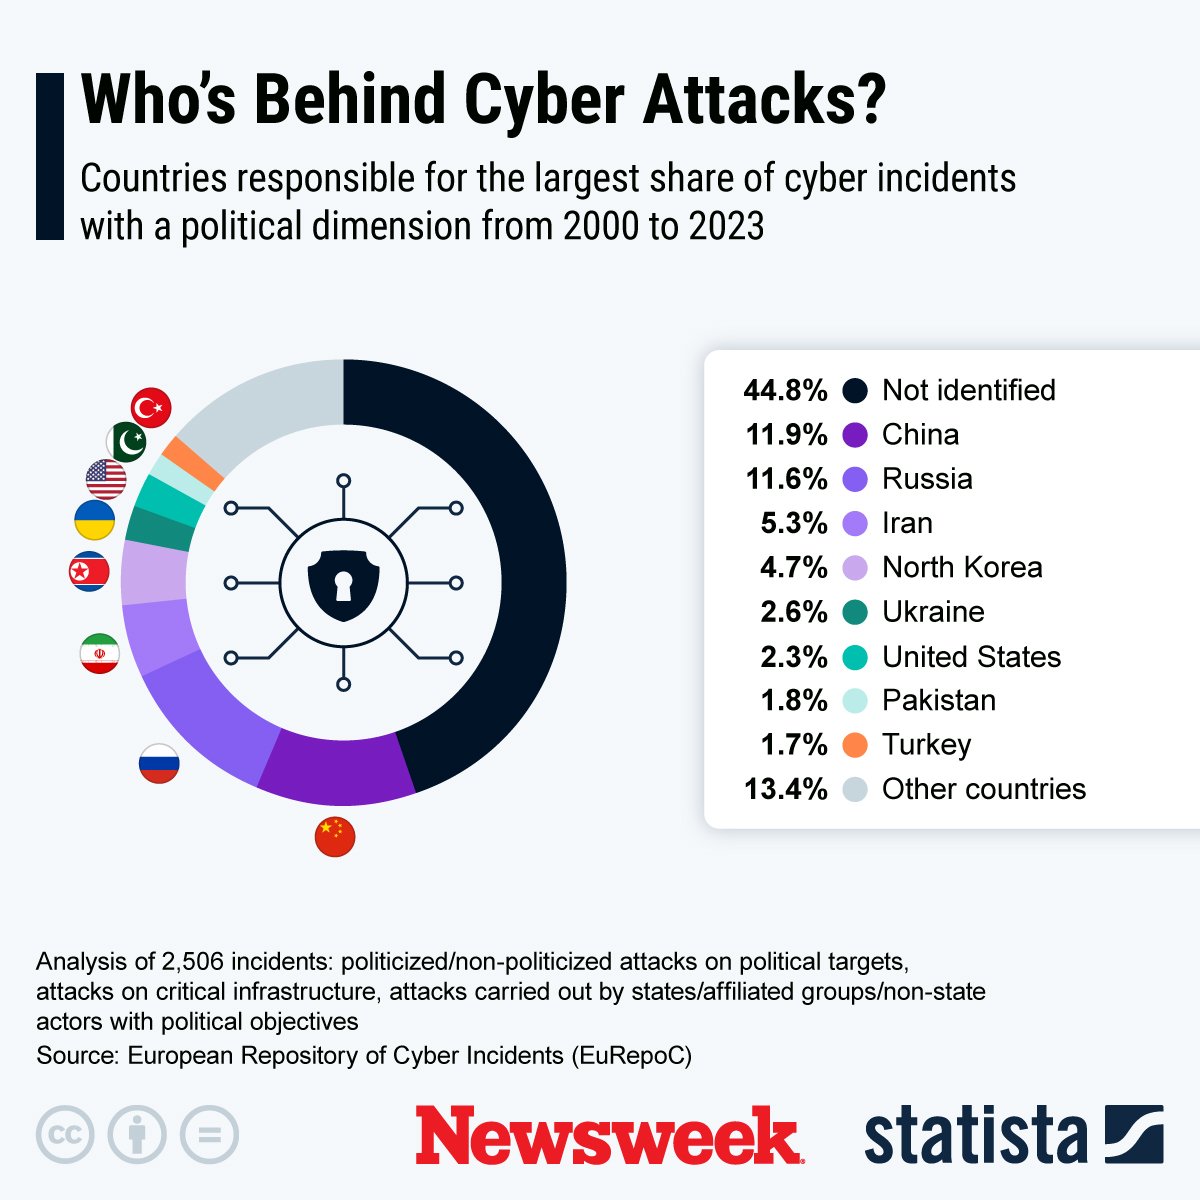 Who's Behind Cyber Attacks?